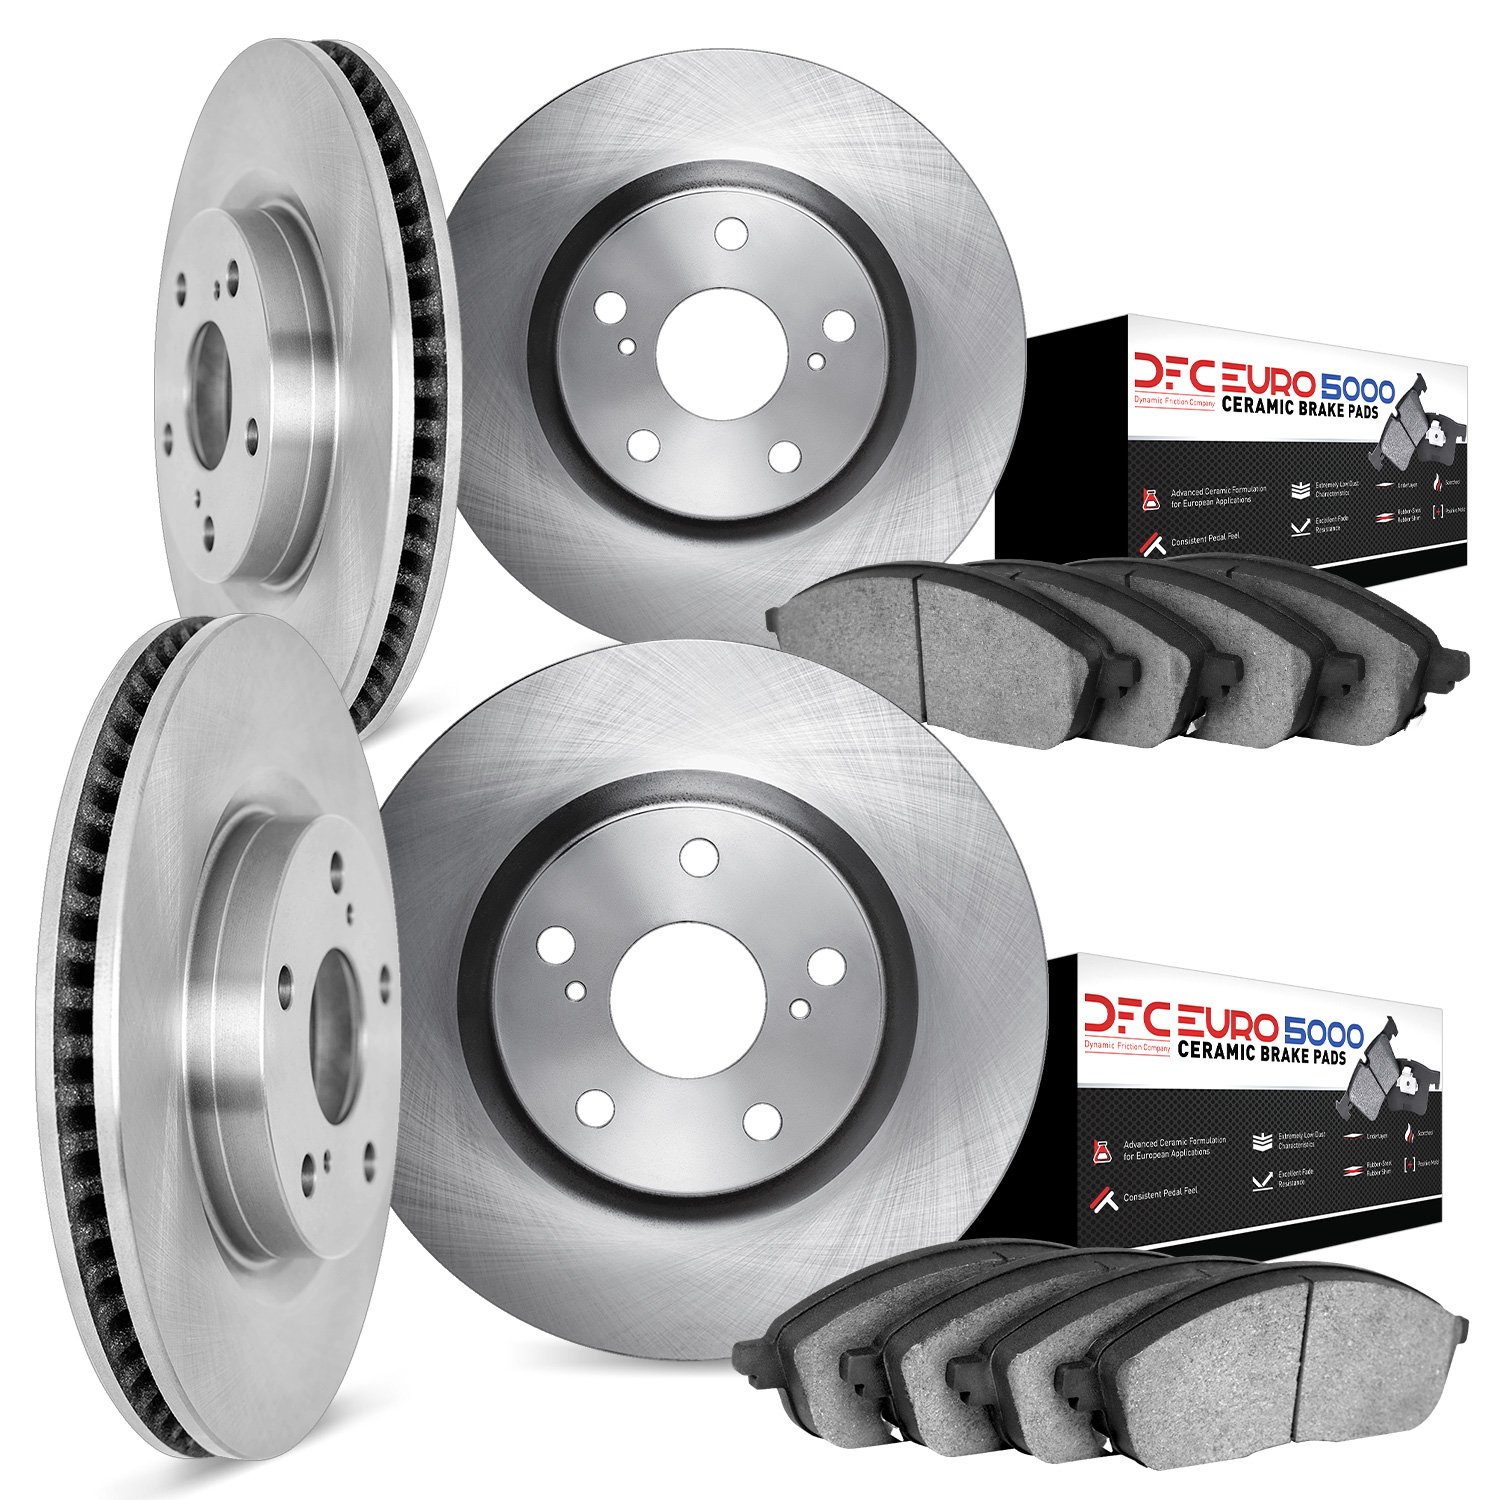 6604-31021 Brake Rotors w/5000 Euro Ceramic Brake Pads, 2008-2013 BMW, Position: Front and Rear